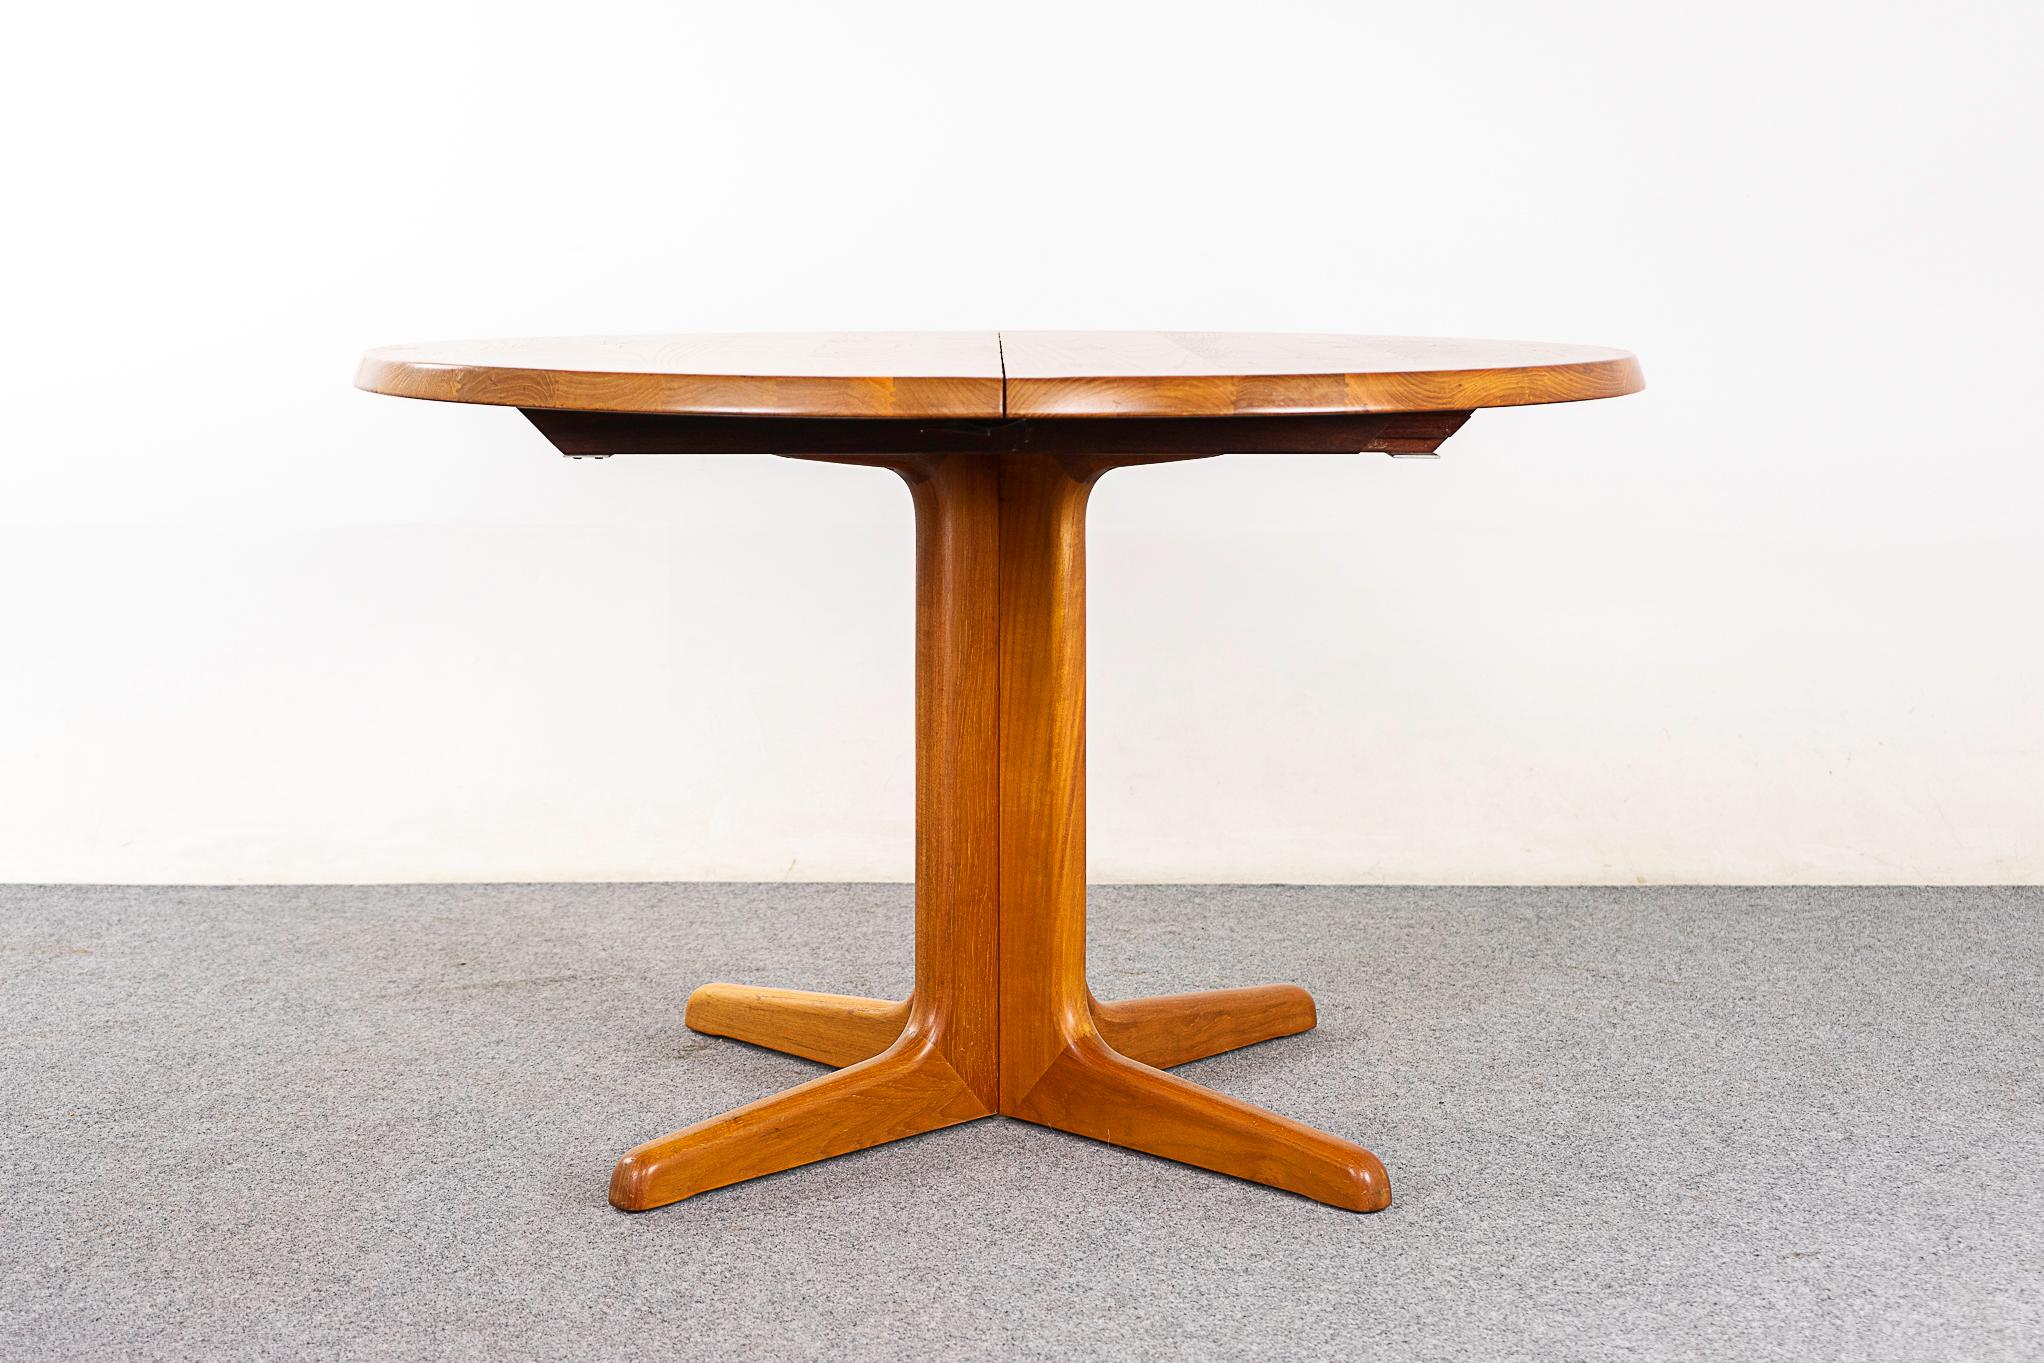 Teak mid-century dining table circa 1970's. Solid teak construction with a beveled edge. Pedestal base and leaf enables you to seat 6-8 guests! Perfect for those dining rooms where every inch counts. 

Unrestored item with option to purchase in